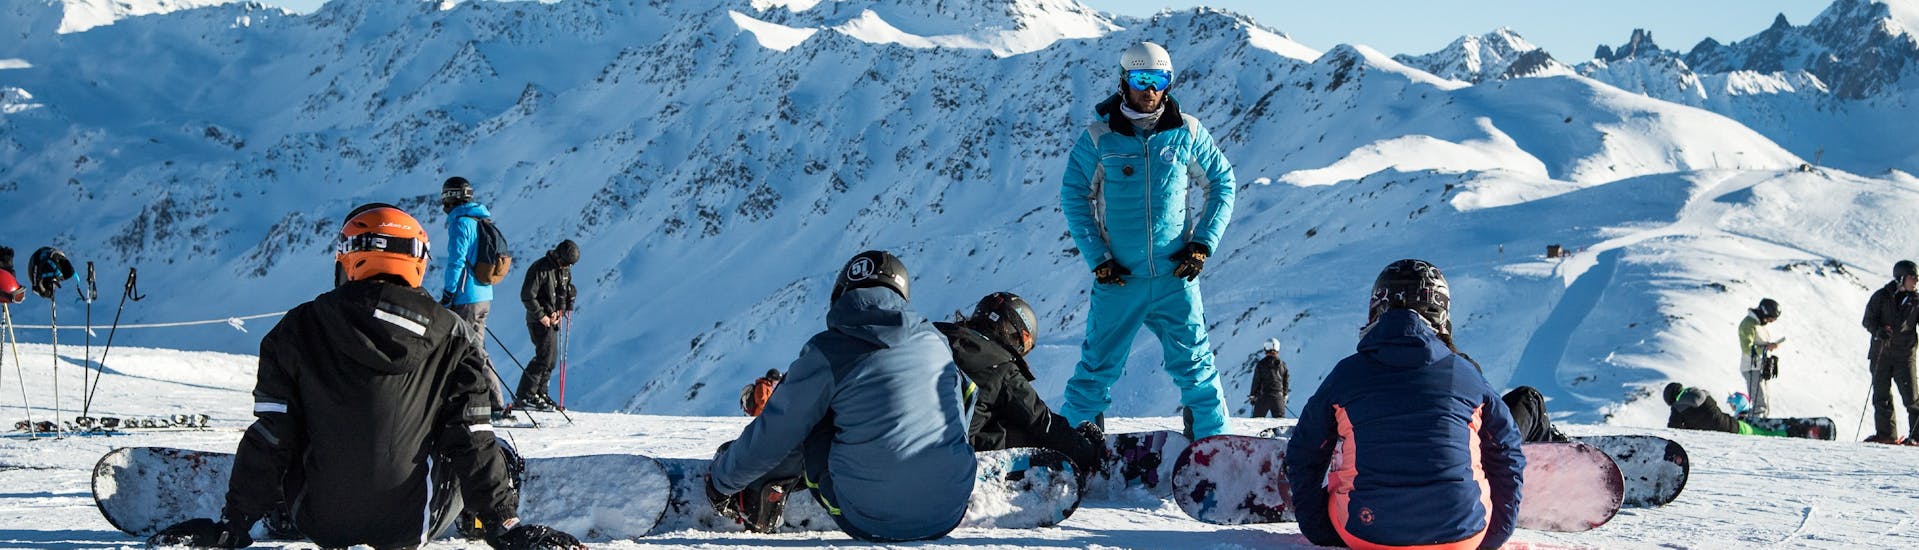 An ESI Ozone instructor explains to his students during a private snowboarding lesson the fundamental techniques of snowboarding on the slopes of Les Orres.